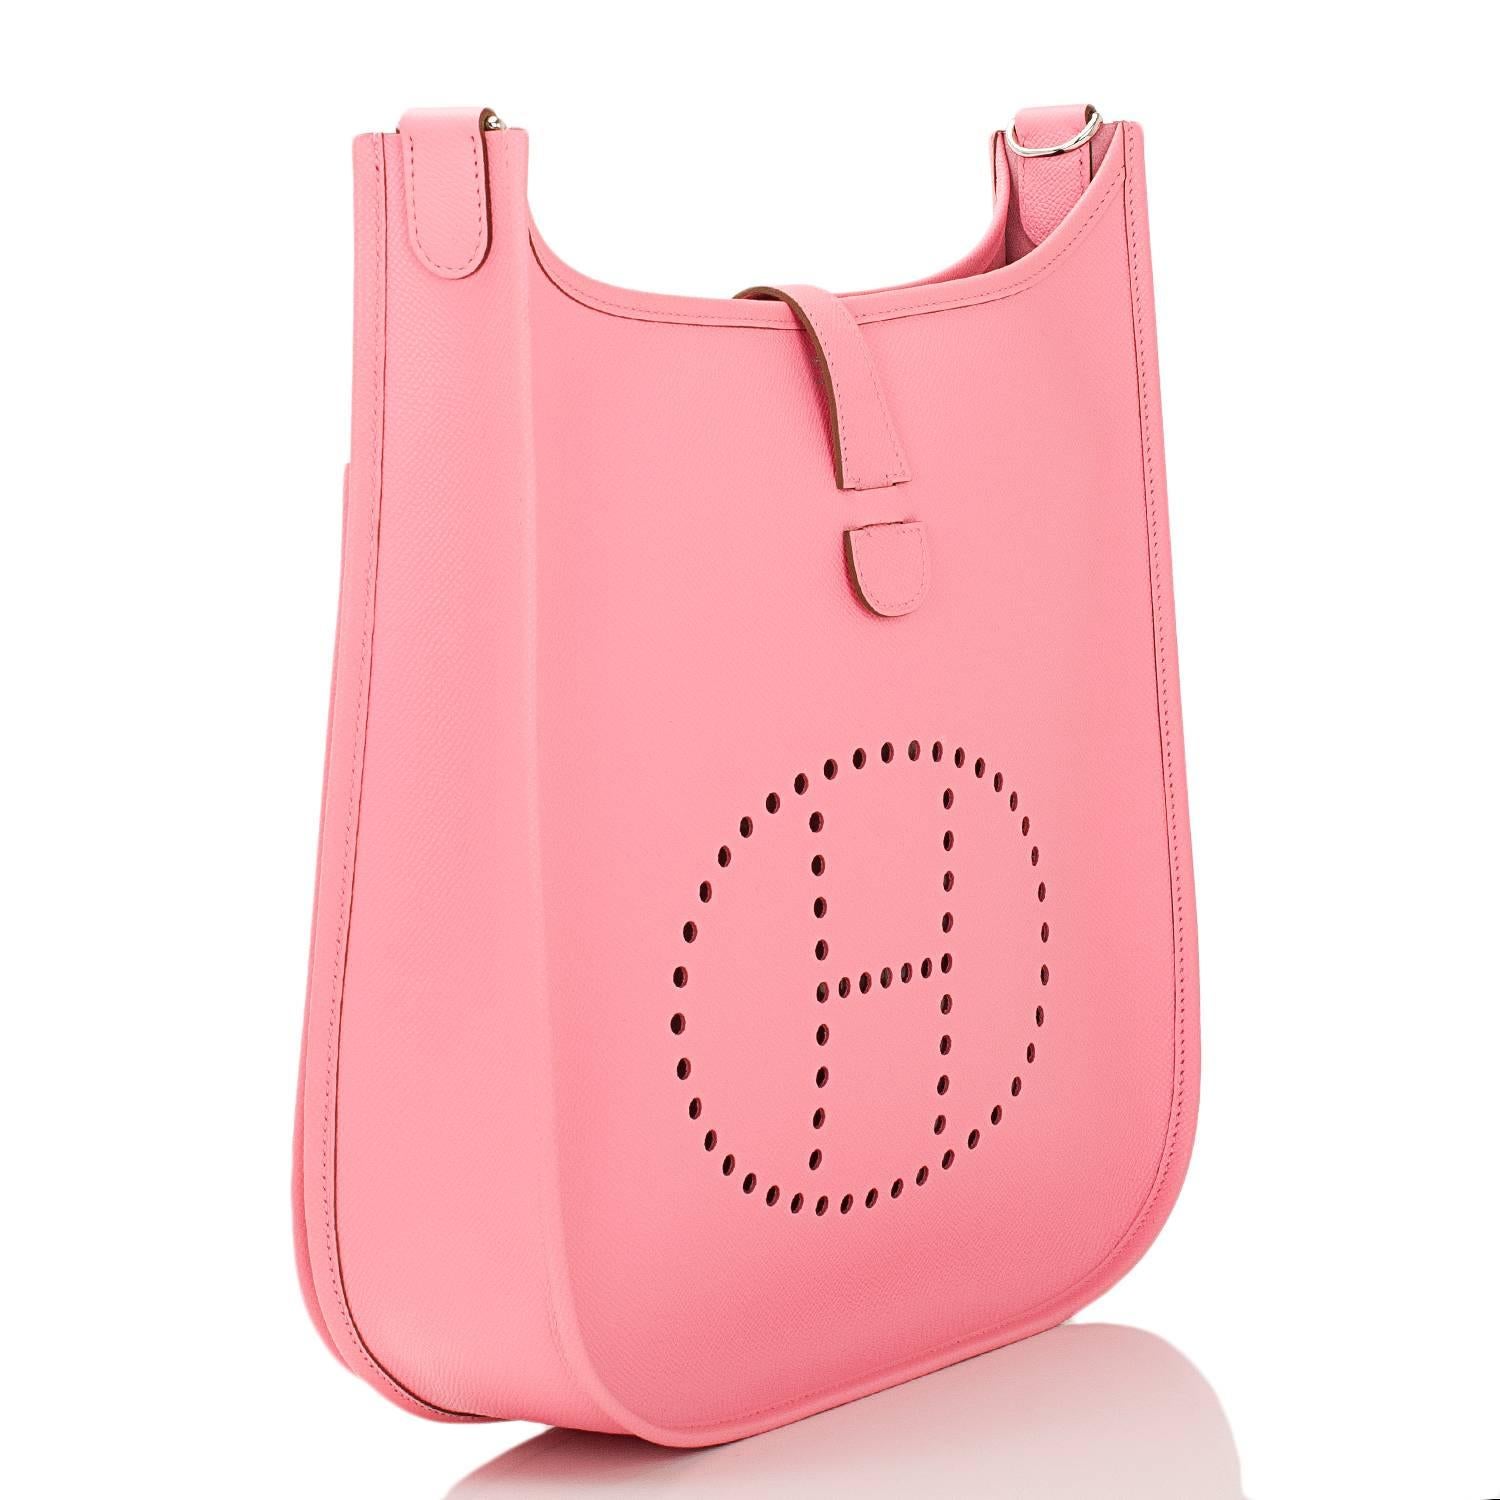 Hermes Rose Confetti Evelyne III GM of epsom leather with palladium hardware.

This Evelyne III has tonal stitching, a large perforated H icon in circle at front, a rear pocket, a pull tab top closure that has a snap closure at the rear, and a